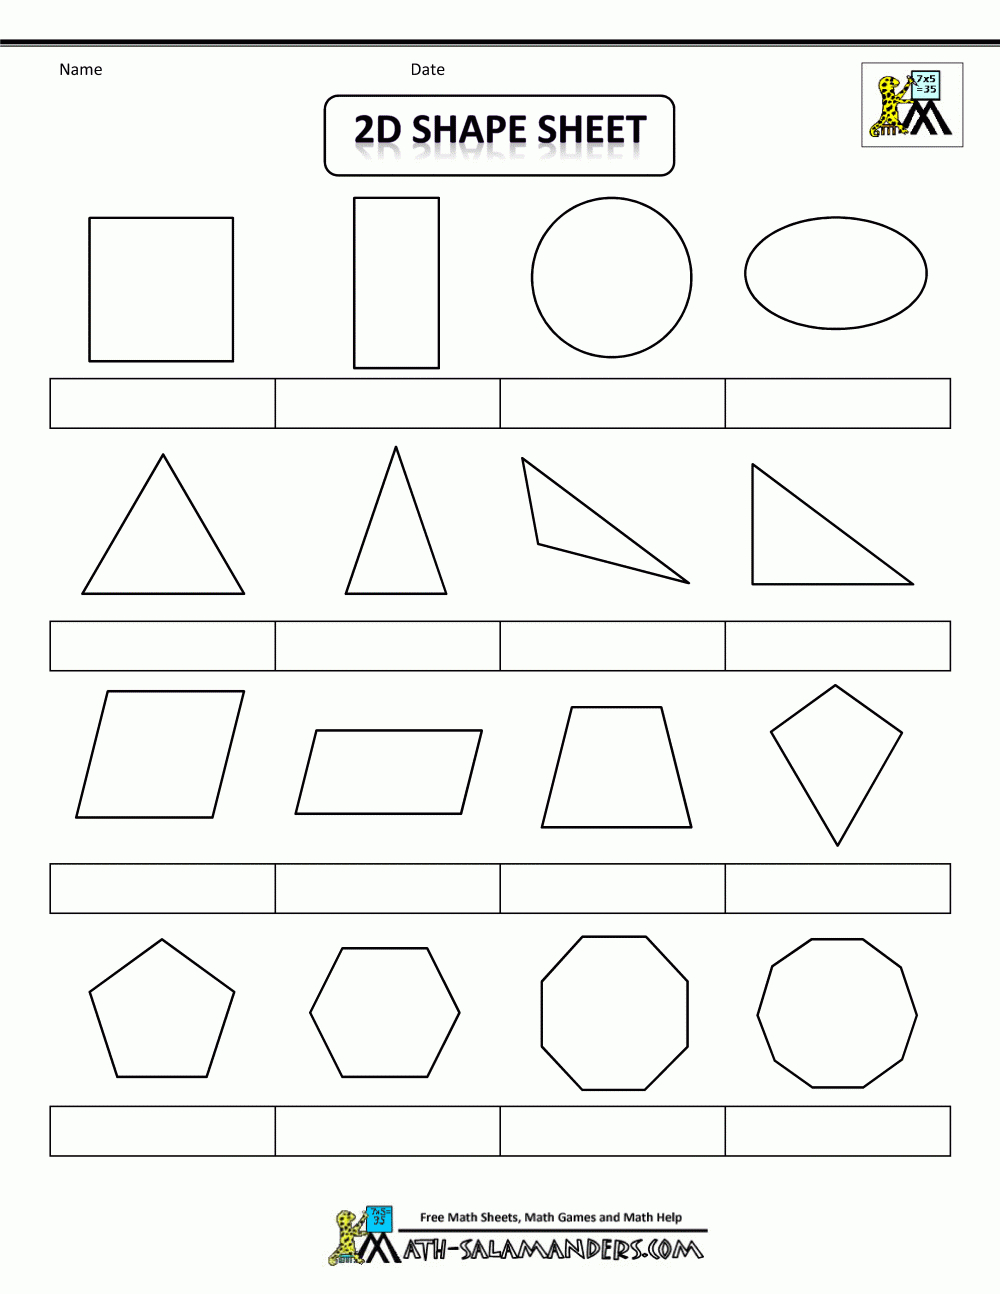 Printable Shapes 2D And 3D - Free Shape Templates Printable